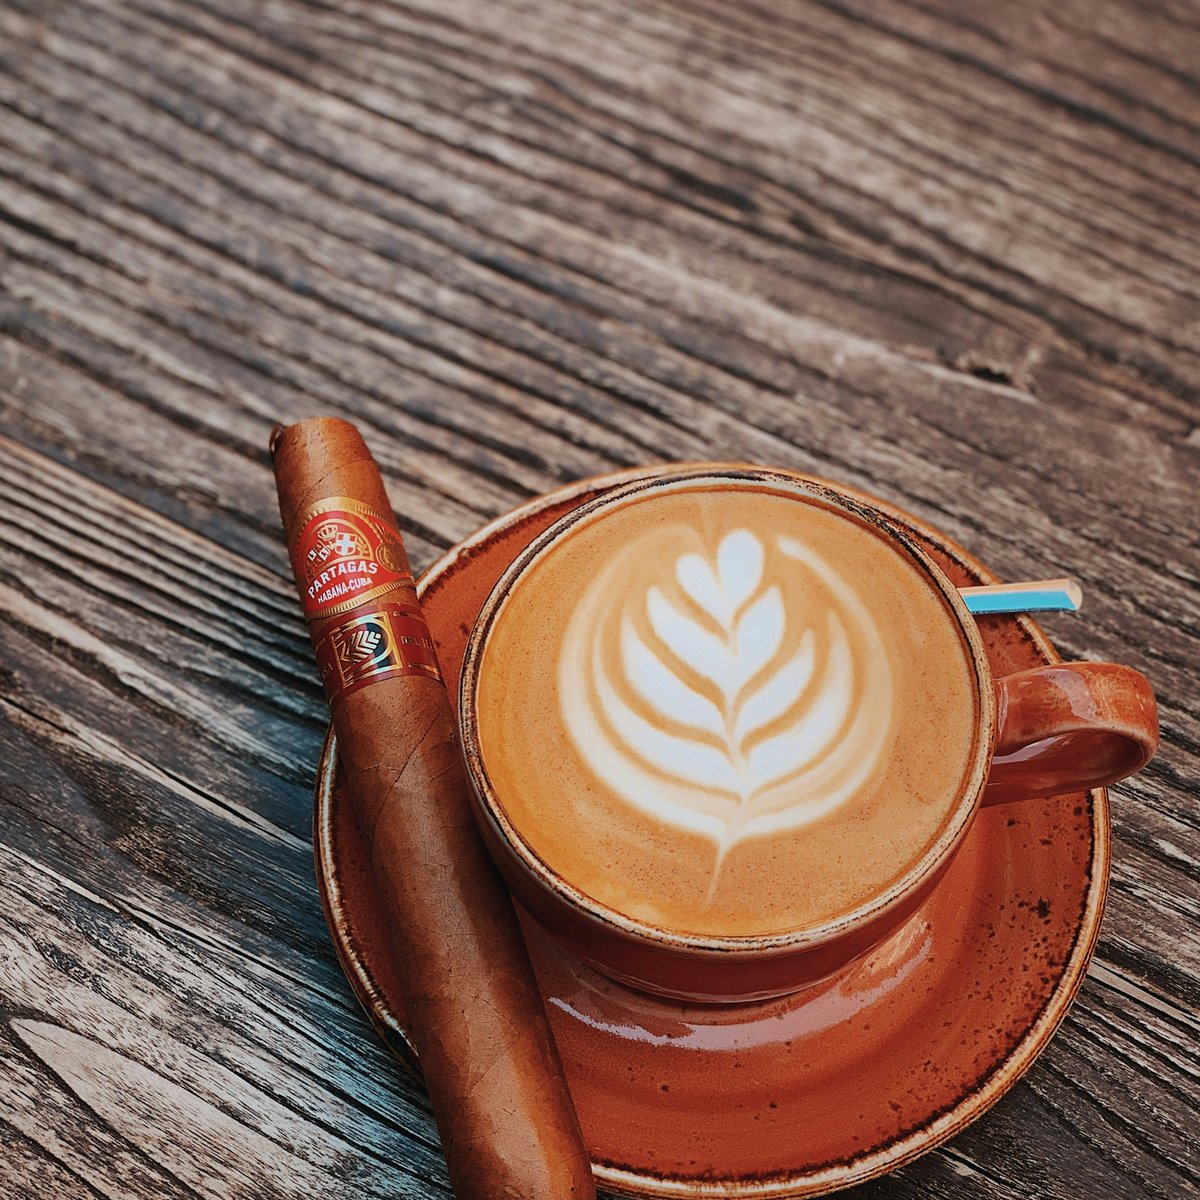 Morning bliss: a perfect pour and a fine cigar. ☕️💨 #CoffeeLover #CigarAficionado #Indulge #TheDarlingHouse #Cigarlife #Luxuryliving #coffeeandcigars